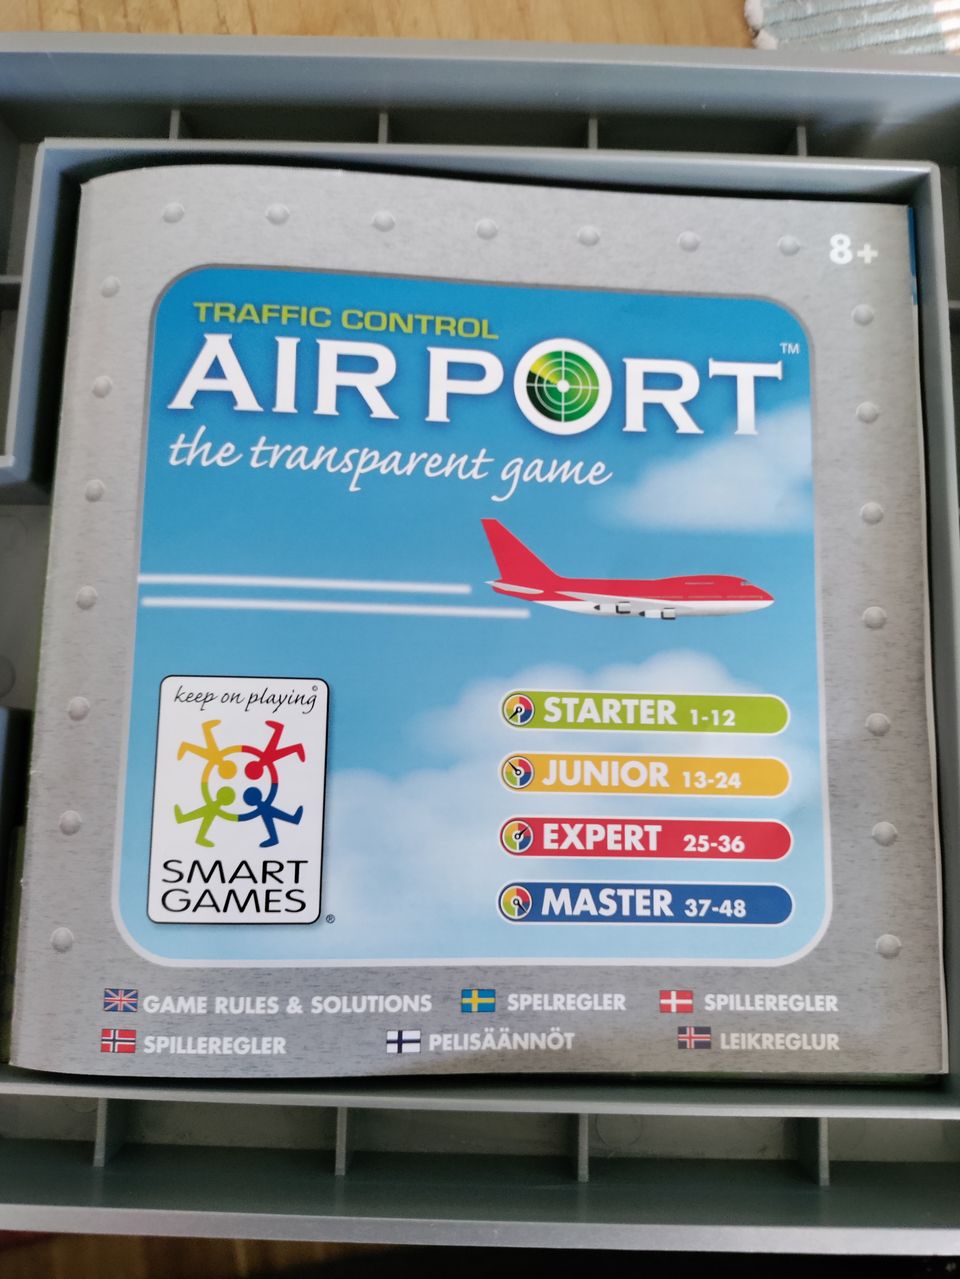 Airport The transparent game